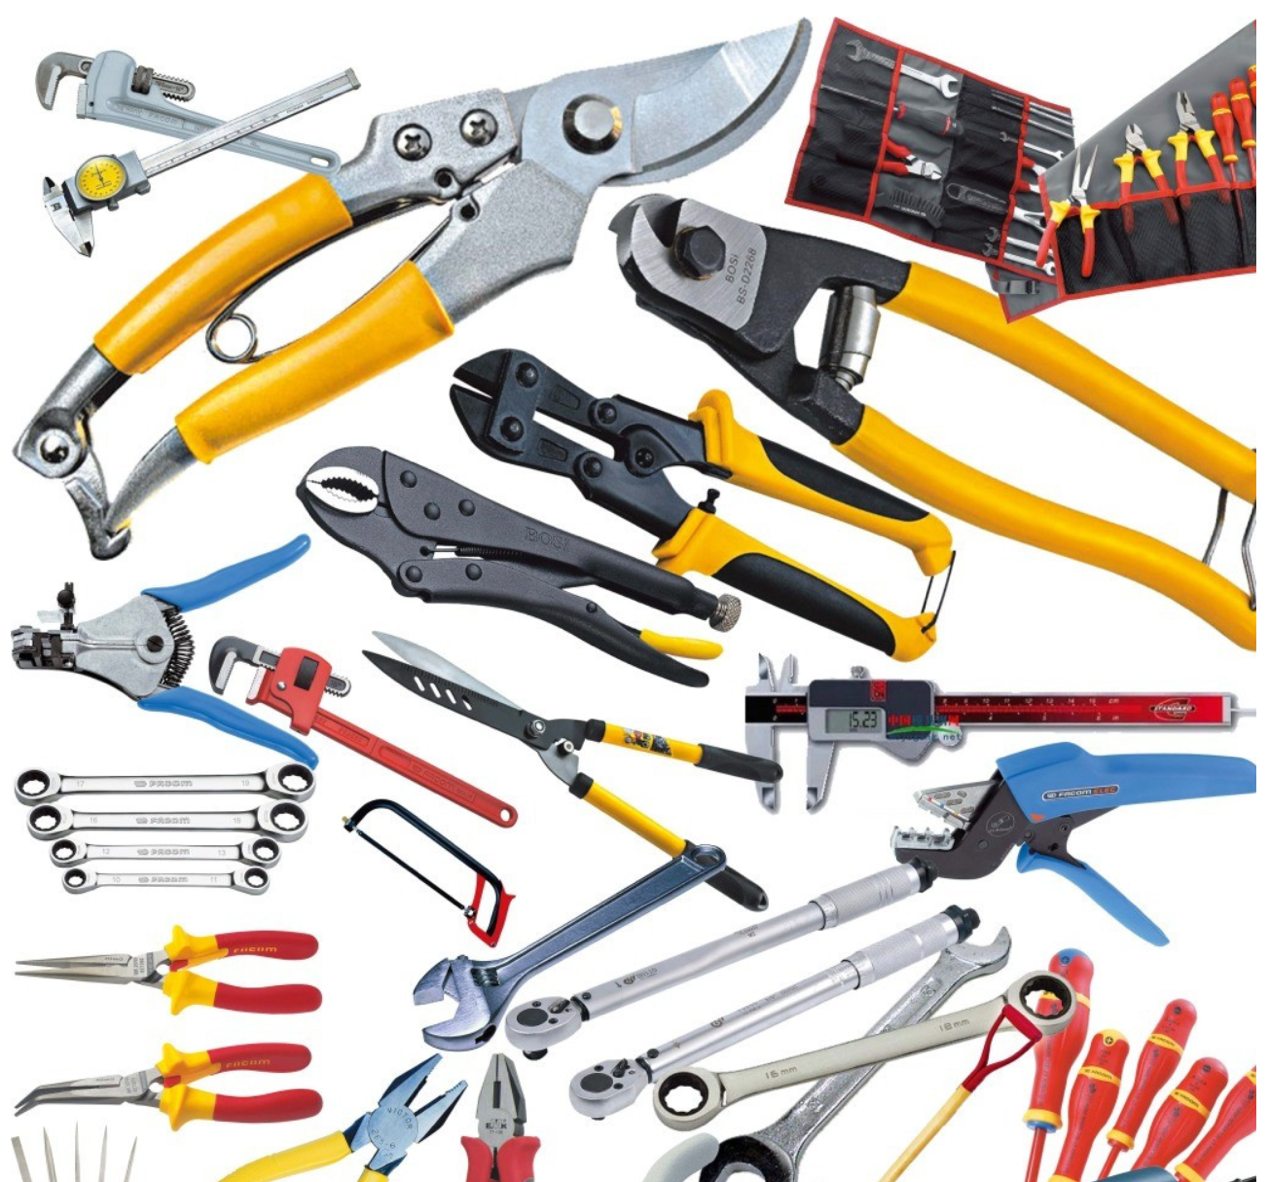 The types and introduction of hardware tools